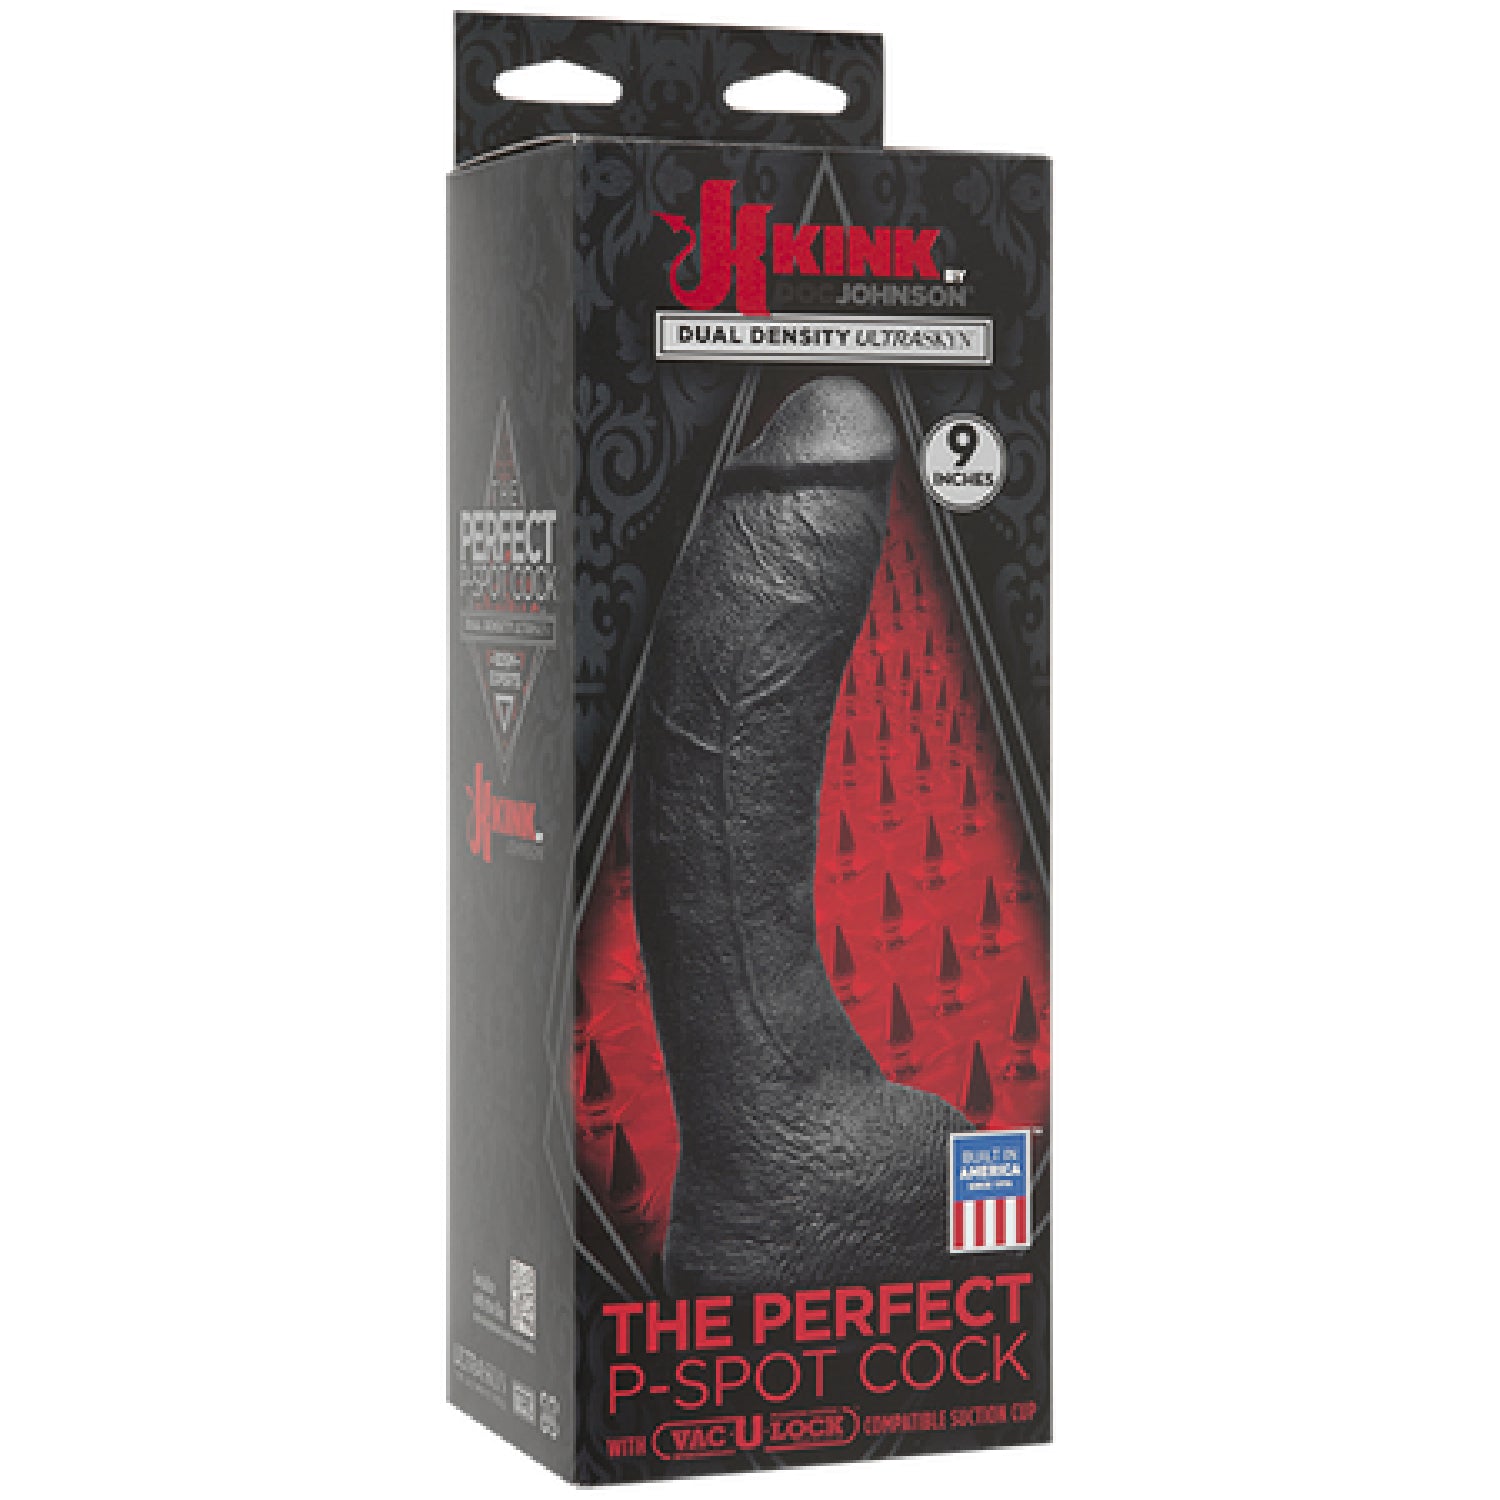 The Perfect P-Spot Cock With Removable Vac-U-Lock Suction Cup Default Title - Club X